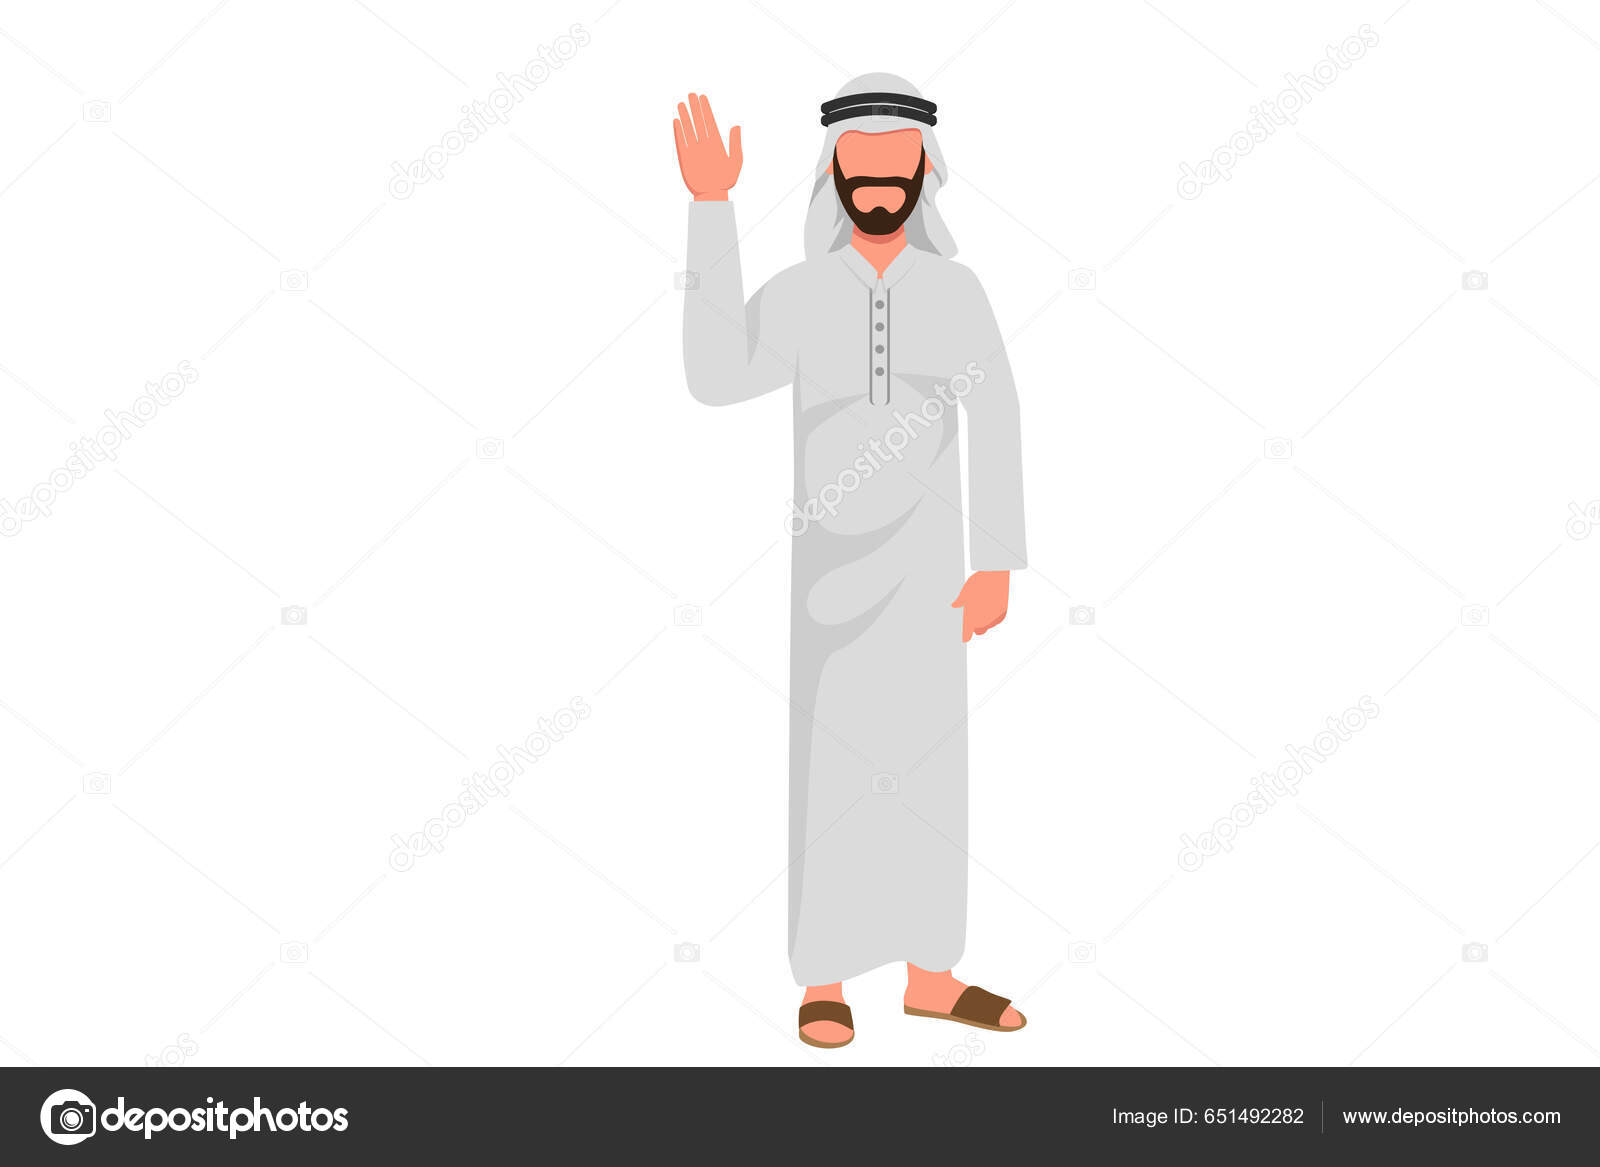 Cartoon of Man Holding Stop Sign And Showing Stop Gesture Stock